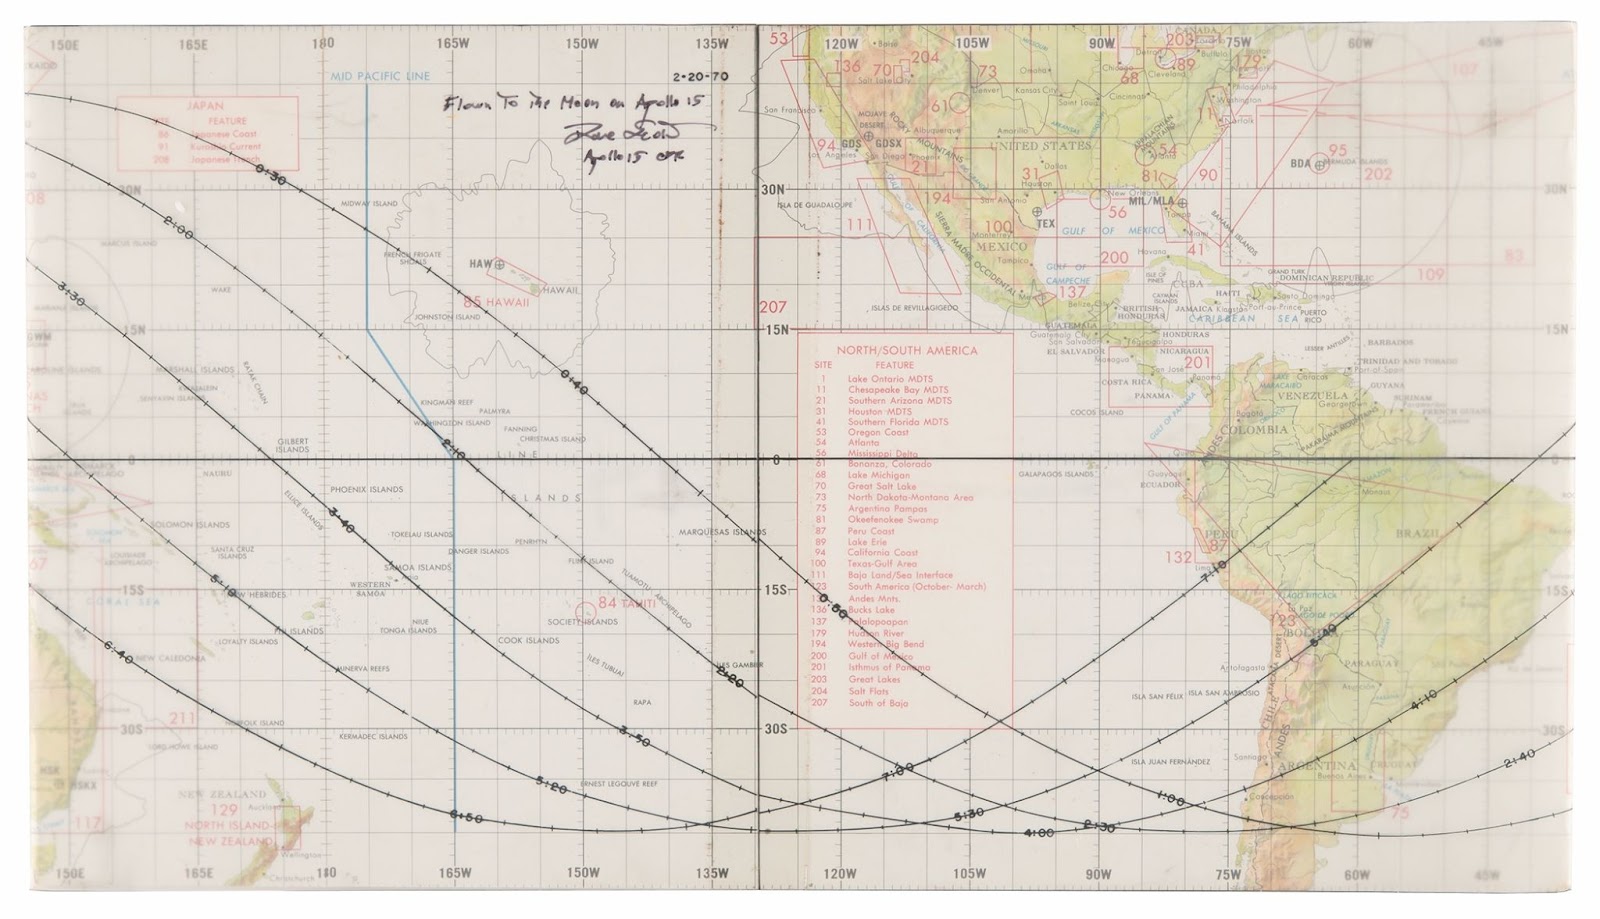 Mission-used Earth orbit chart signed by moonwalker Dave Scott.